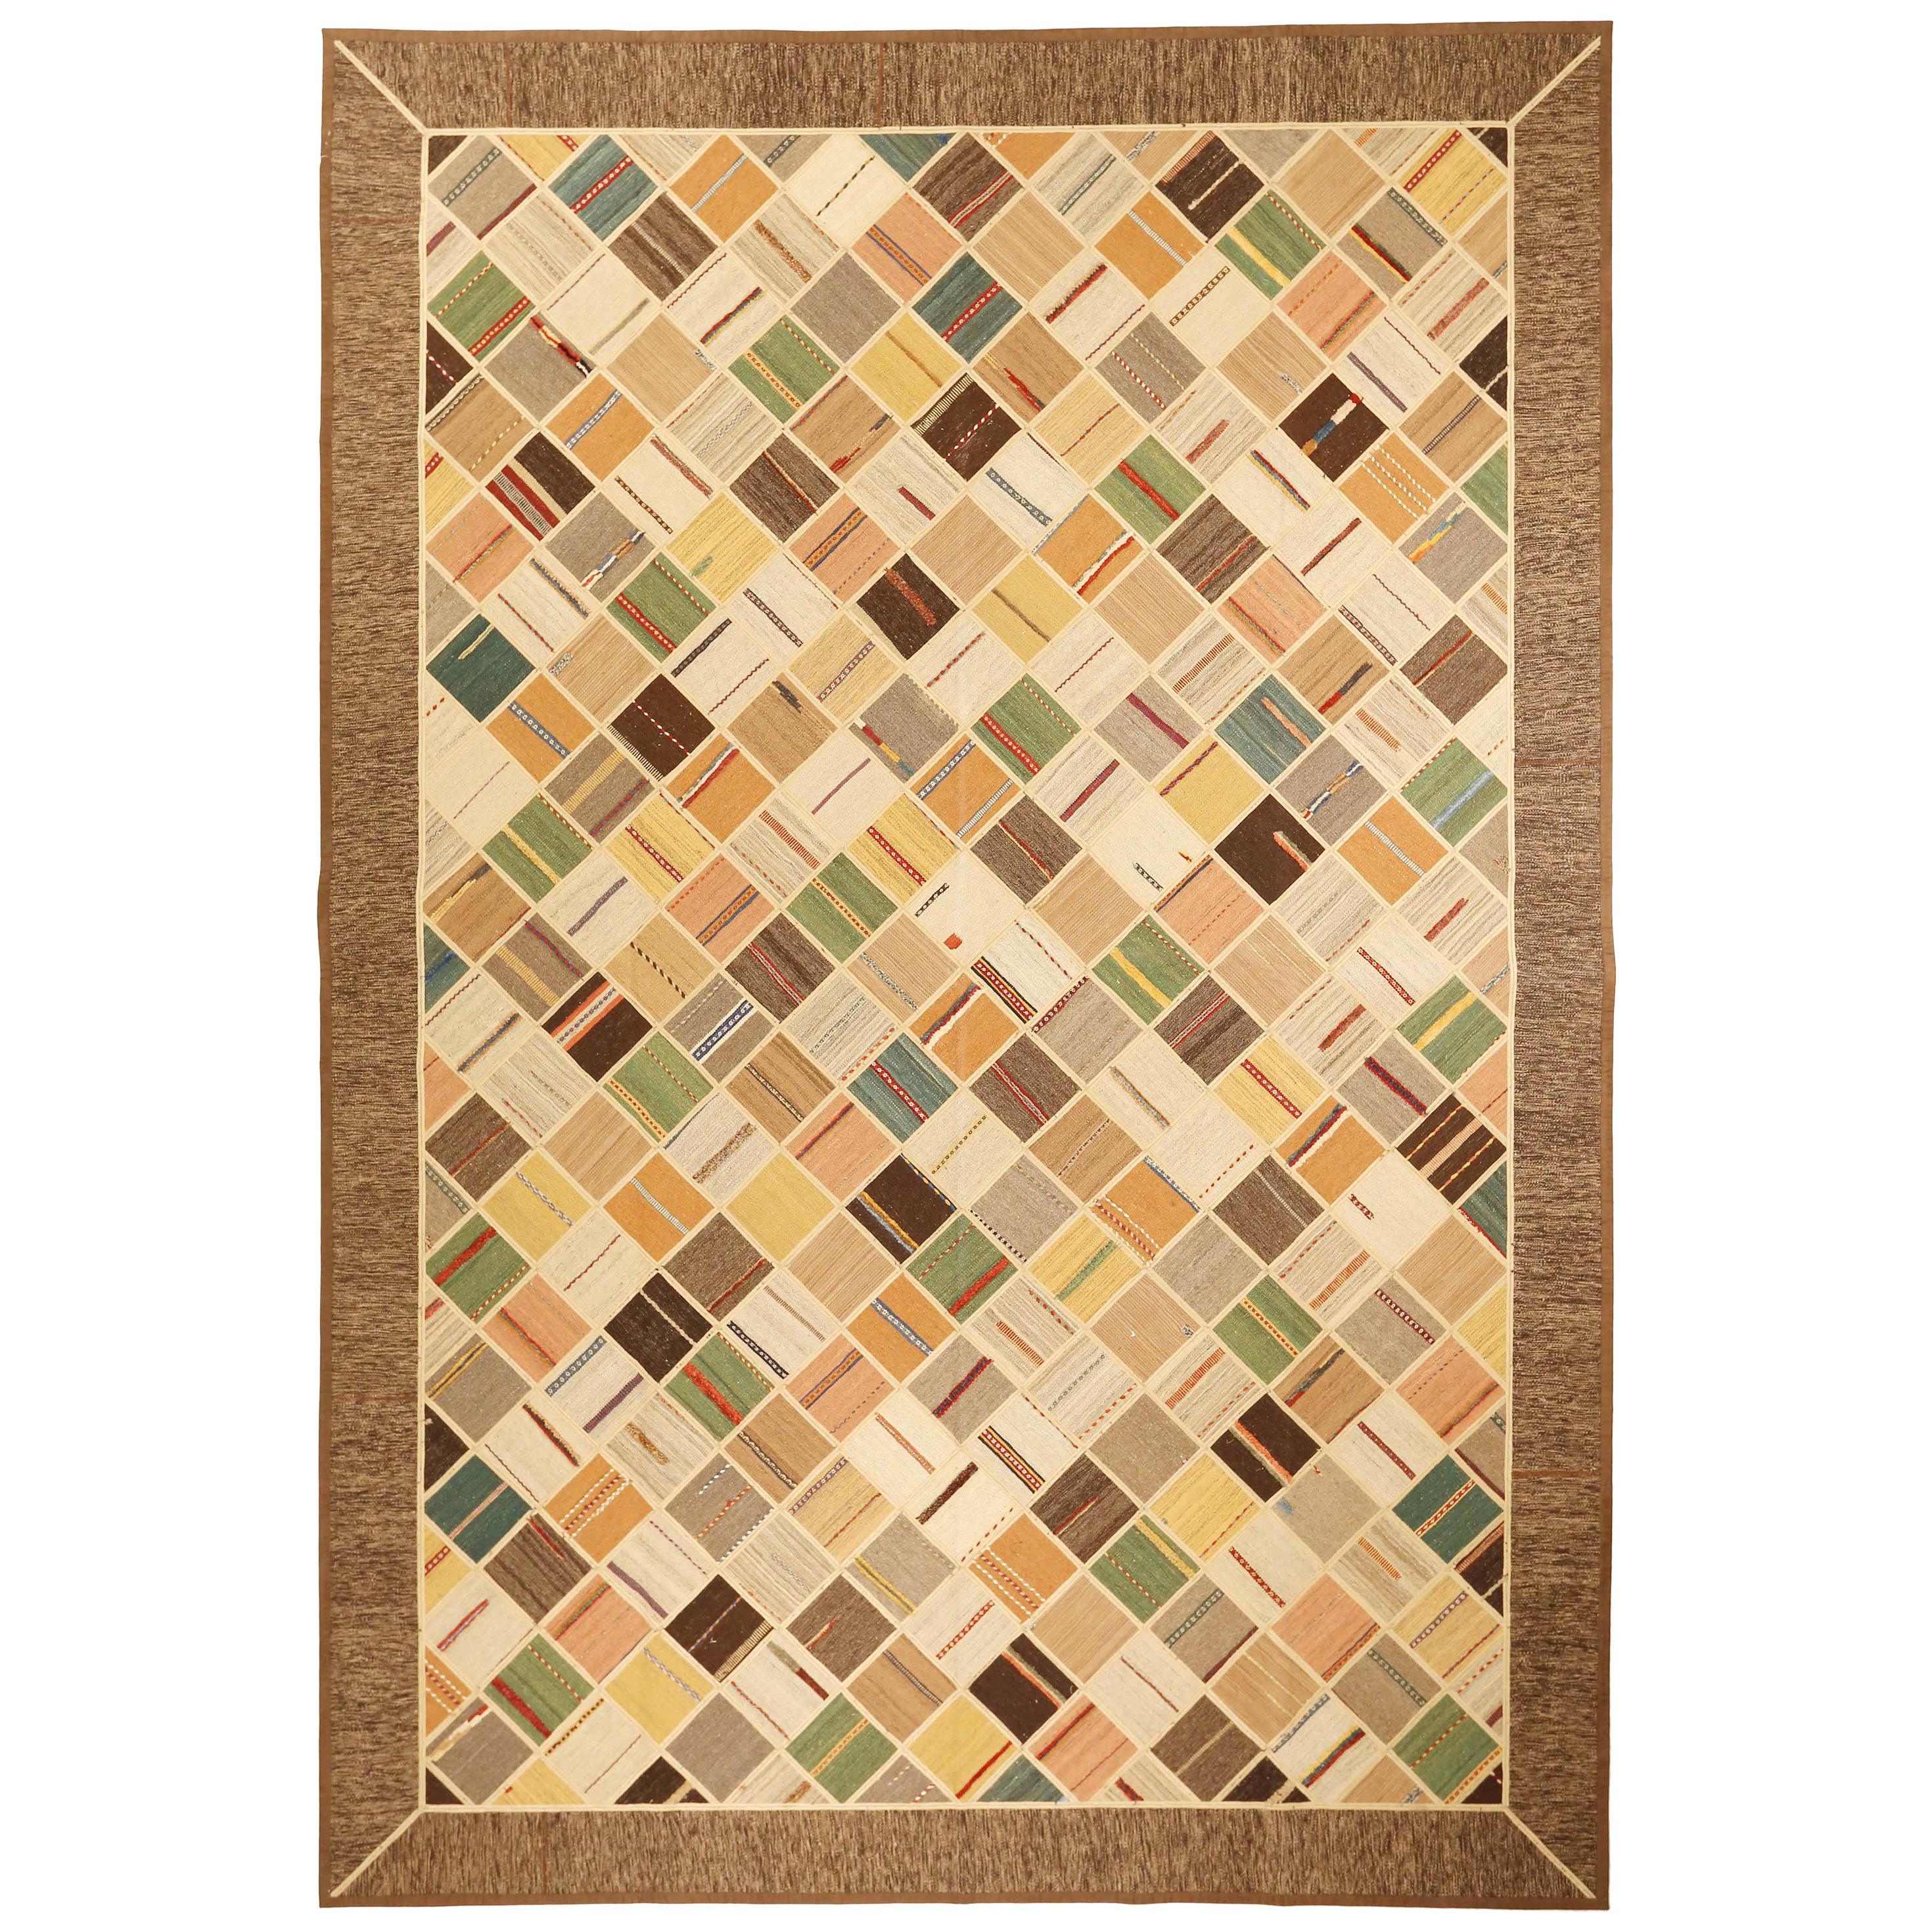 Modern Turkish Patch Kilim Rug with Colored Diagonal Tile Patterns